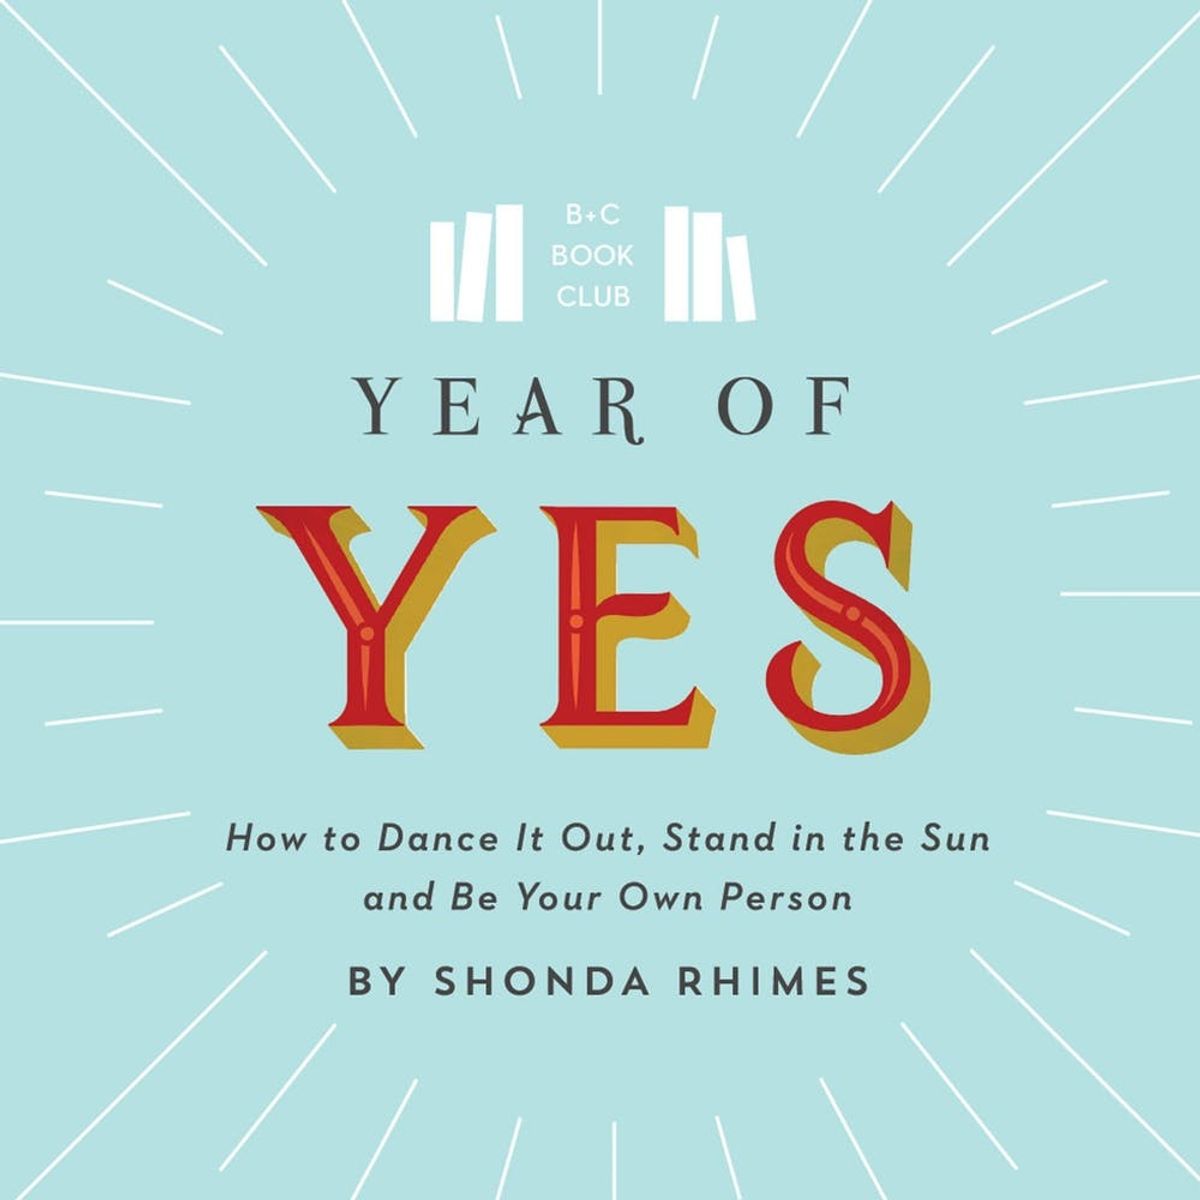 Why Shonda Rhimes’s New Book Is A Must-Read Before the New Year